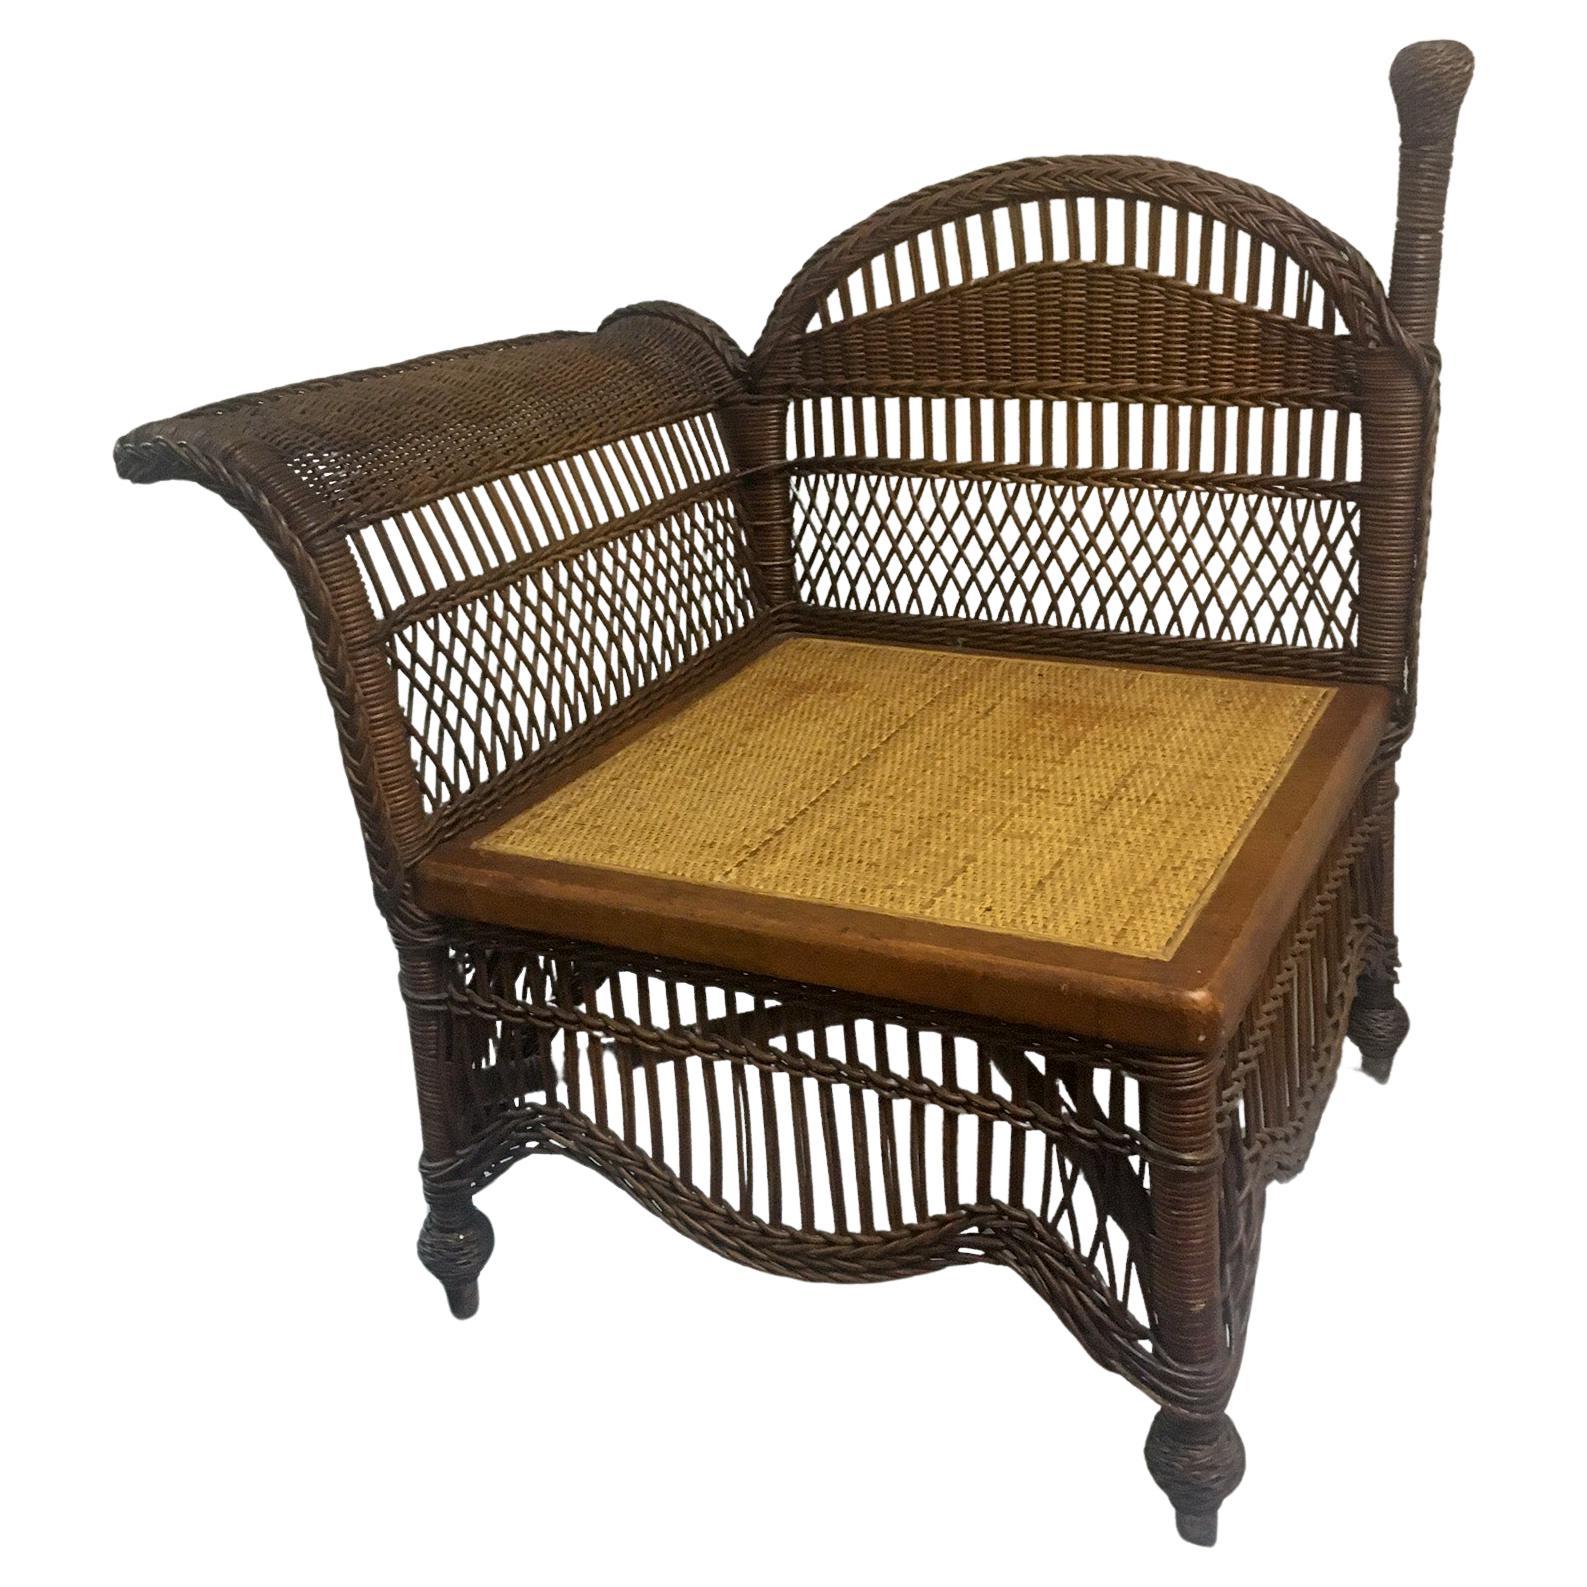 Antique Wicker Heywood Wakefield Corner or Photographer's Chair For Sale